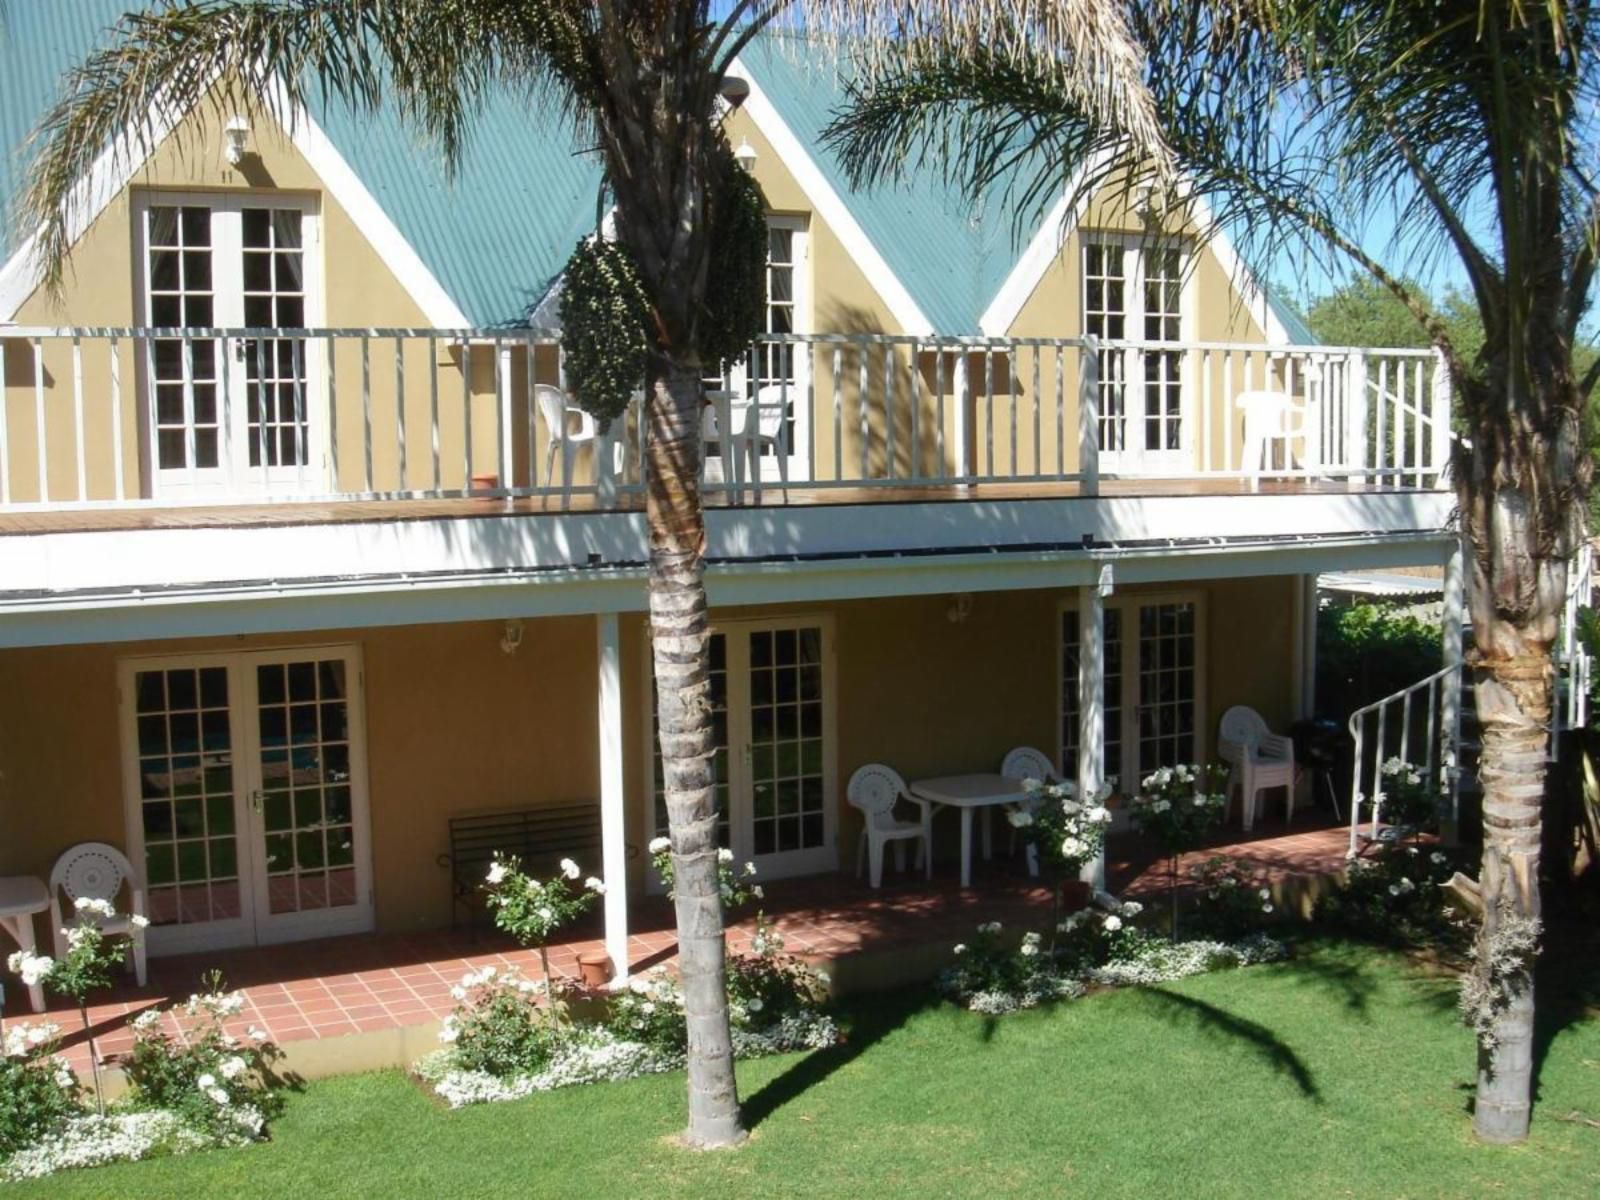 Yamkela Guest House Oudtshoorn Western Cape South Africa House, Building, Architecture, Palm Tree, Plant, Nature, Wood